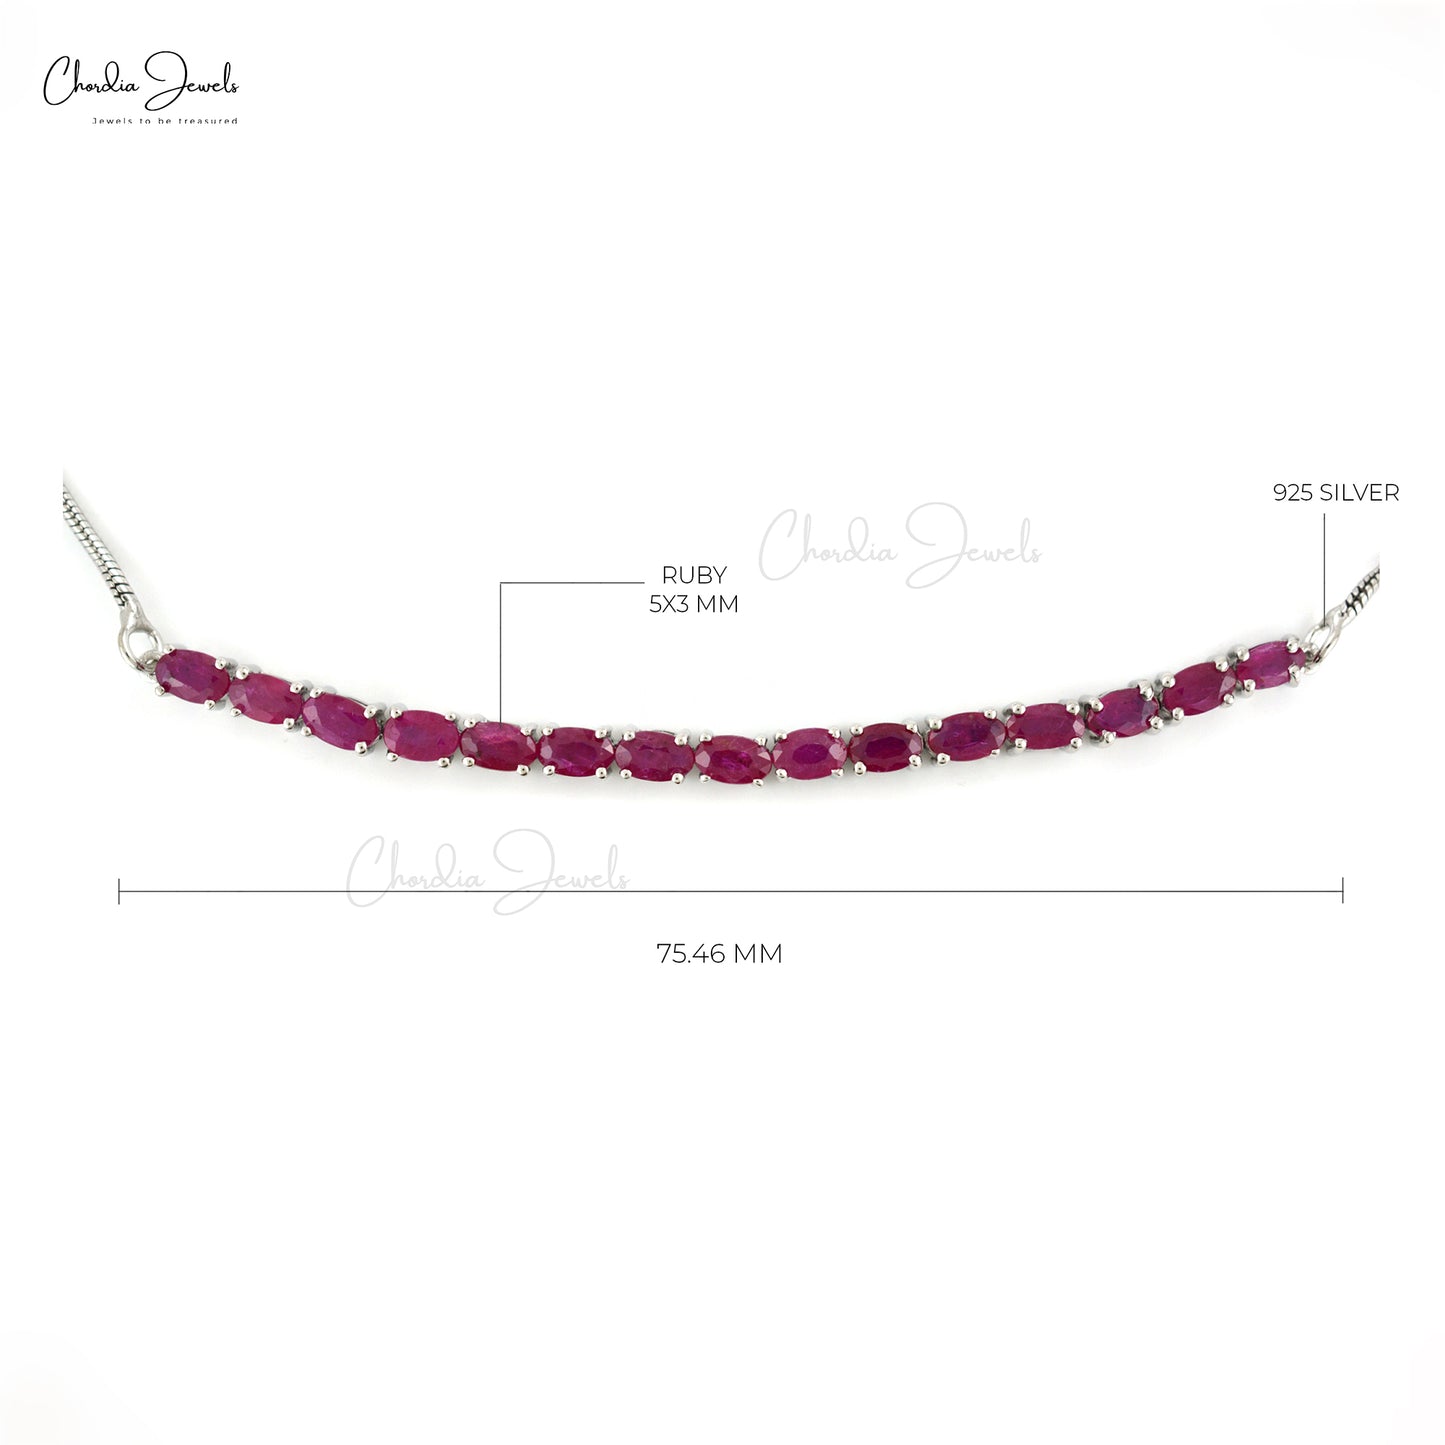 Load image into Gallery viewer, Genuine Ruby Tennis Bracelet 925 Sterling Silver Gemstone Fine Silver Wedding Jewelry At Discount Price
